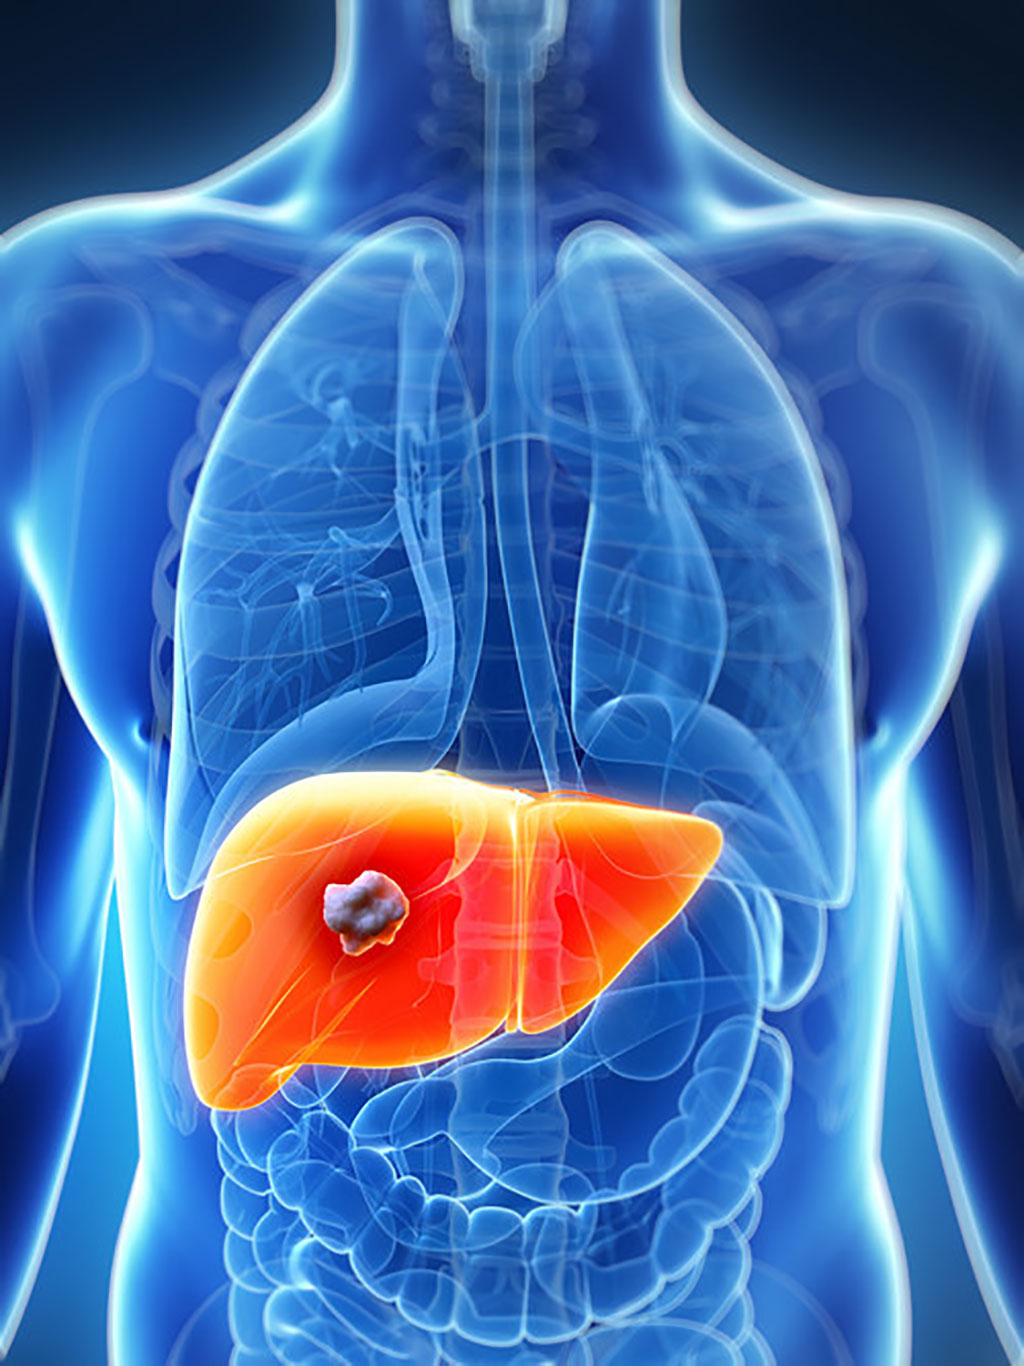 Image: Liver cancer is the third-leading cause of cancer-related deaths worldwide (Photo courtesy of Delfi Diagnostics)